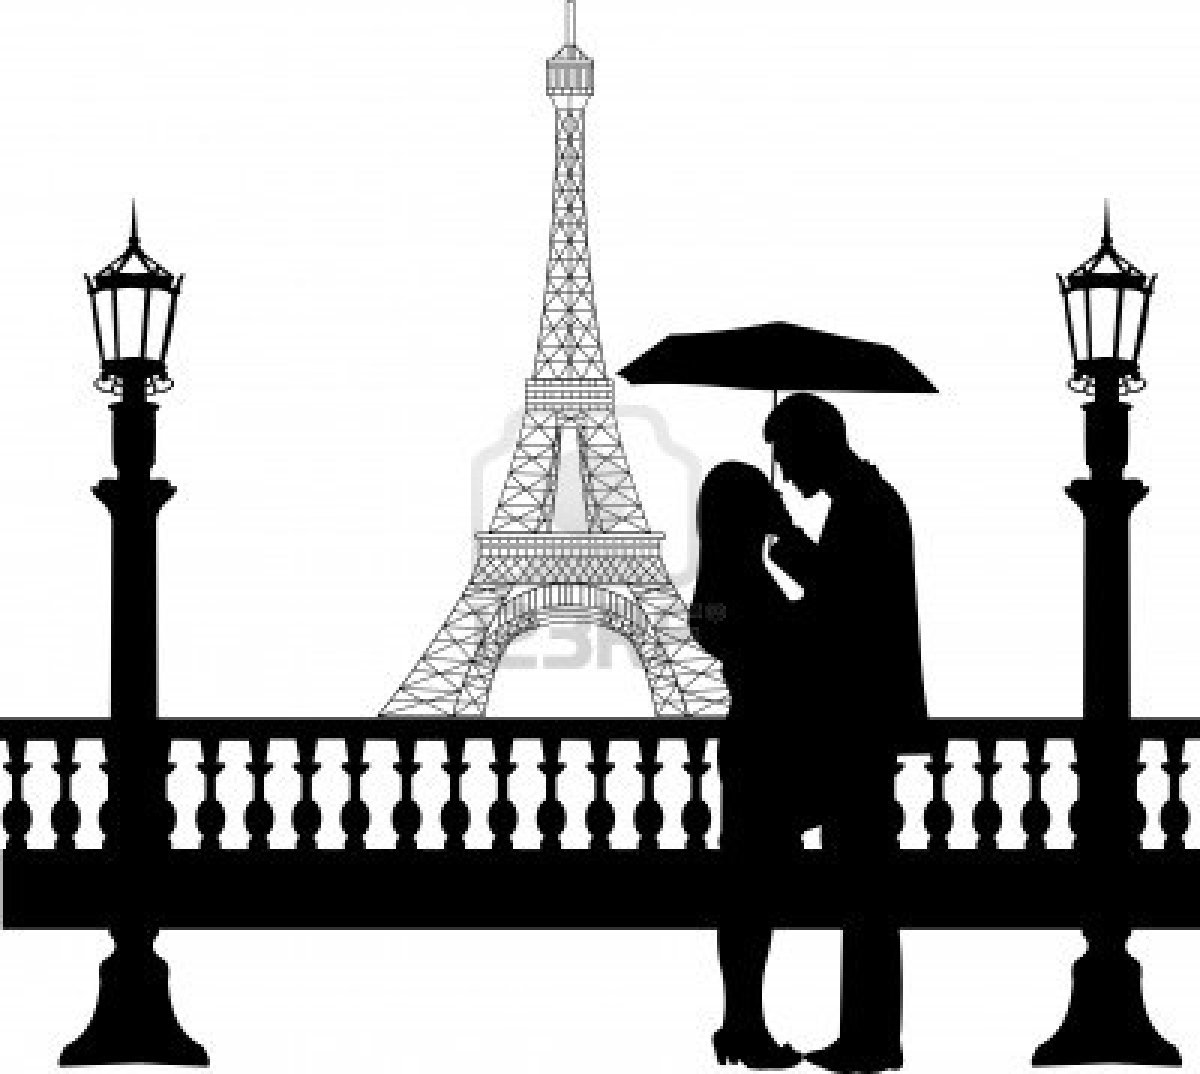 Couple Under Umbrella Silhouette Images   Pictures   Becuo